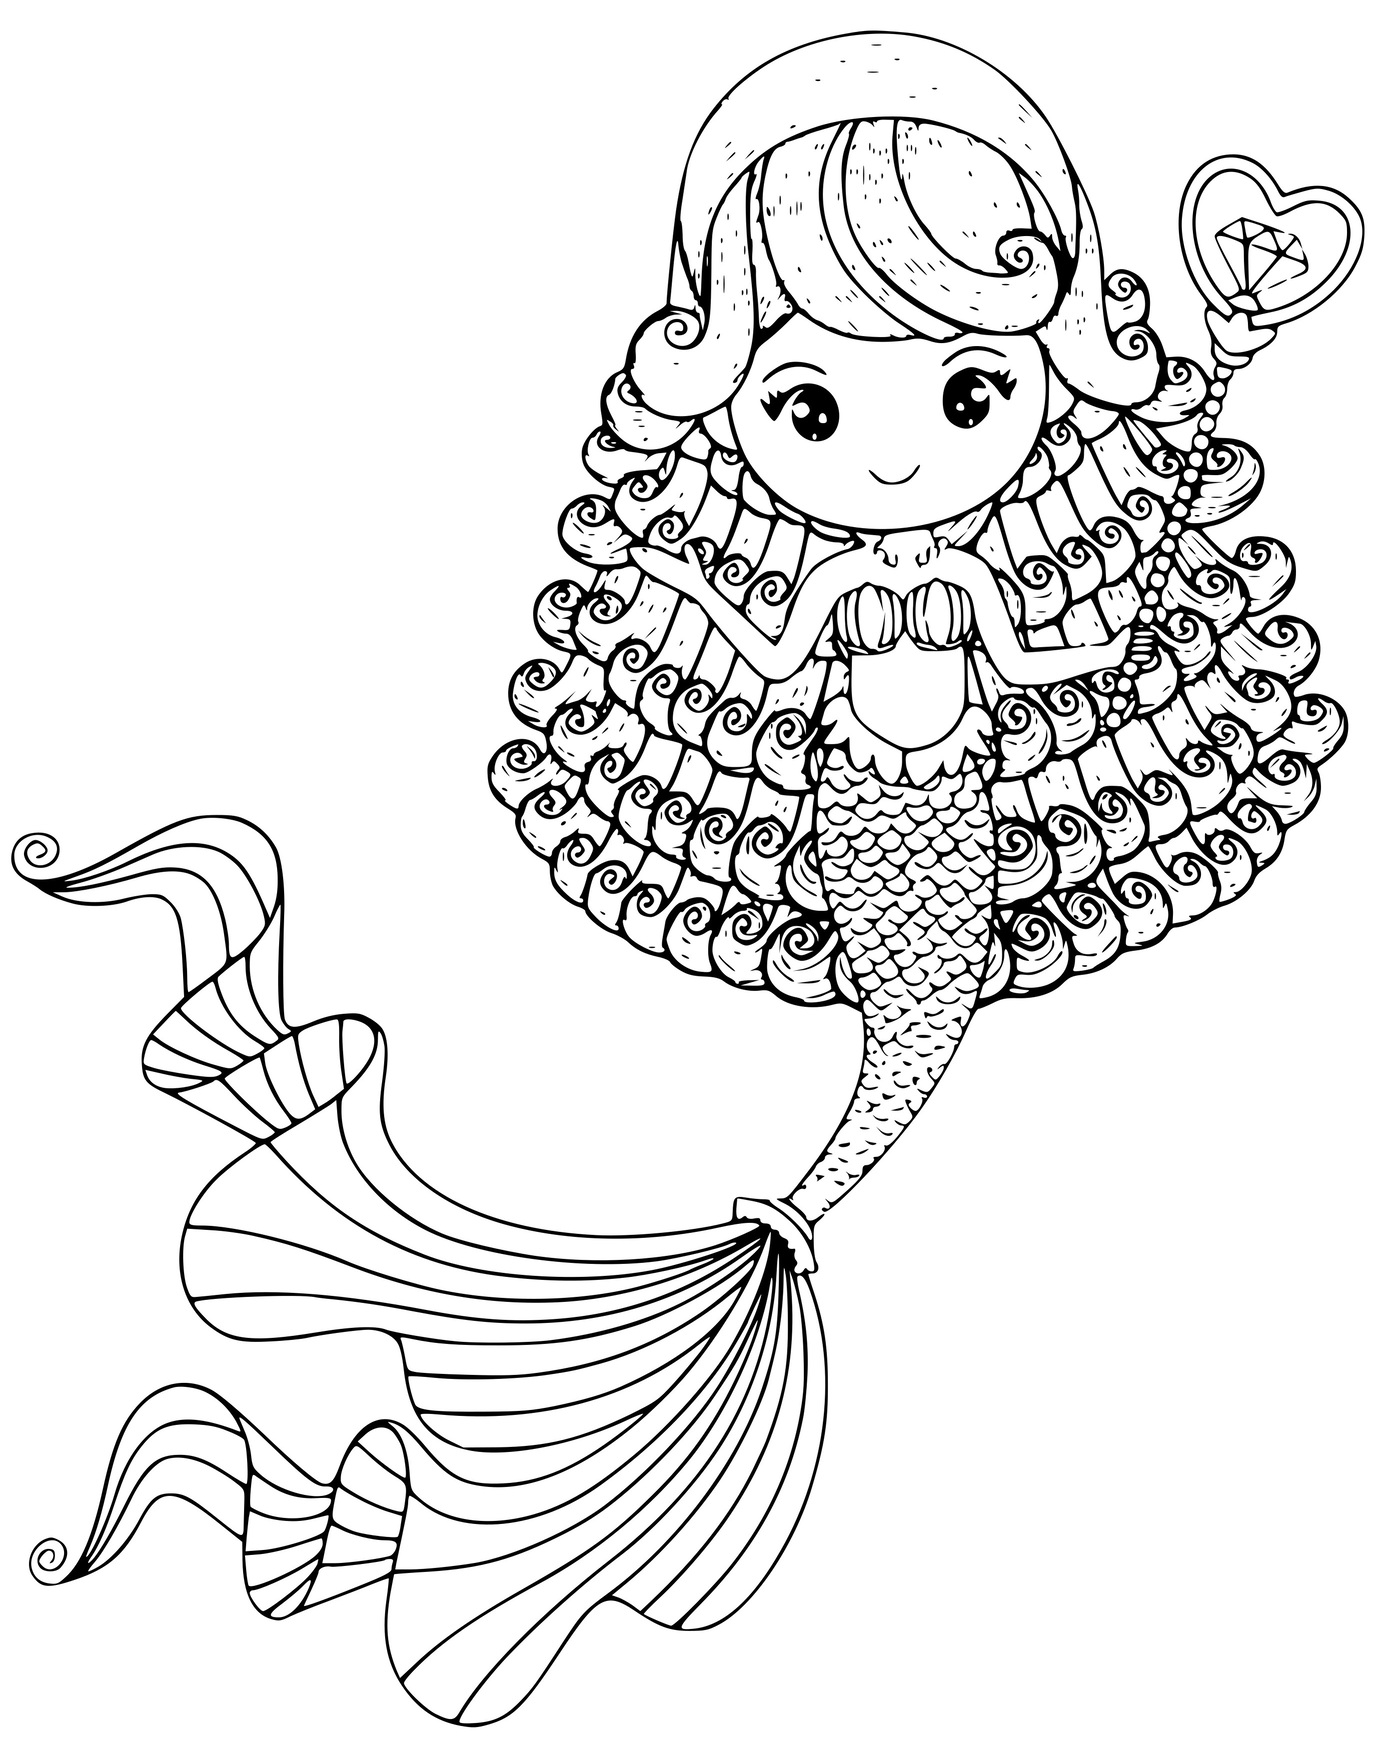 Cute Little Mermaid With A Long Tail